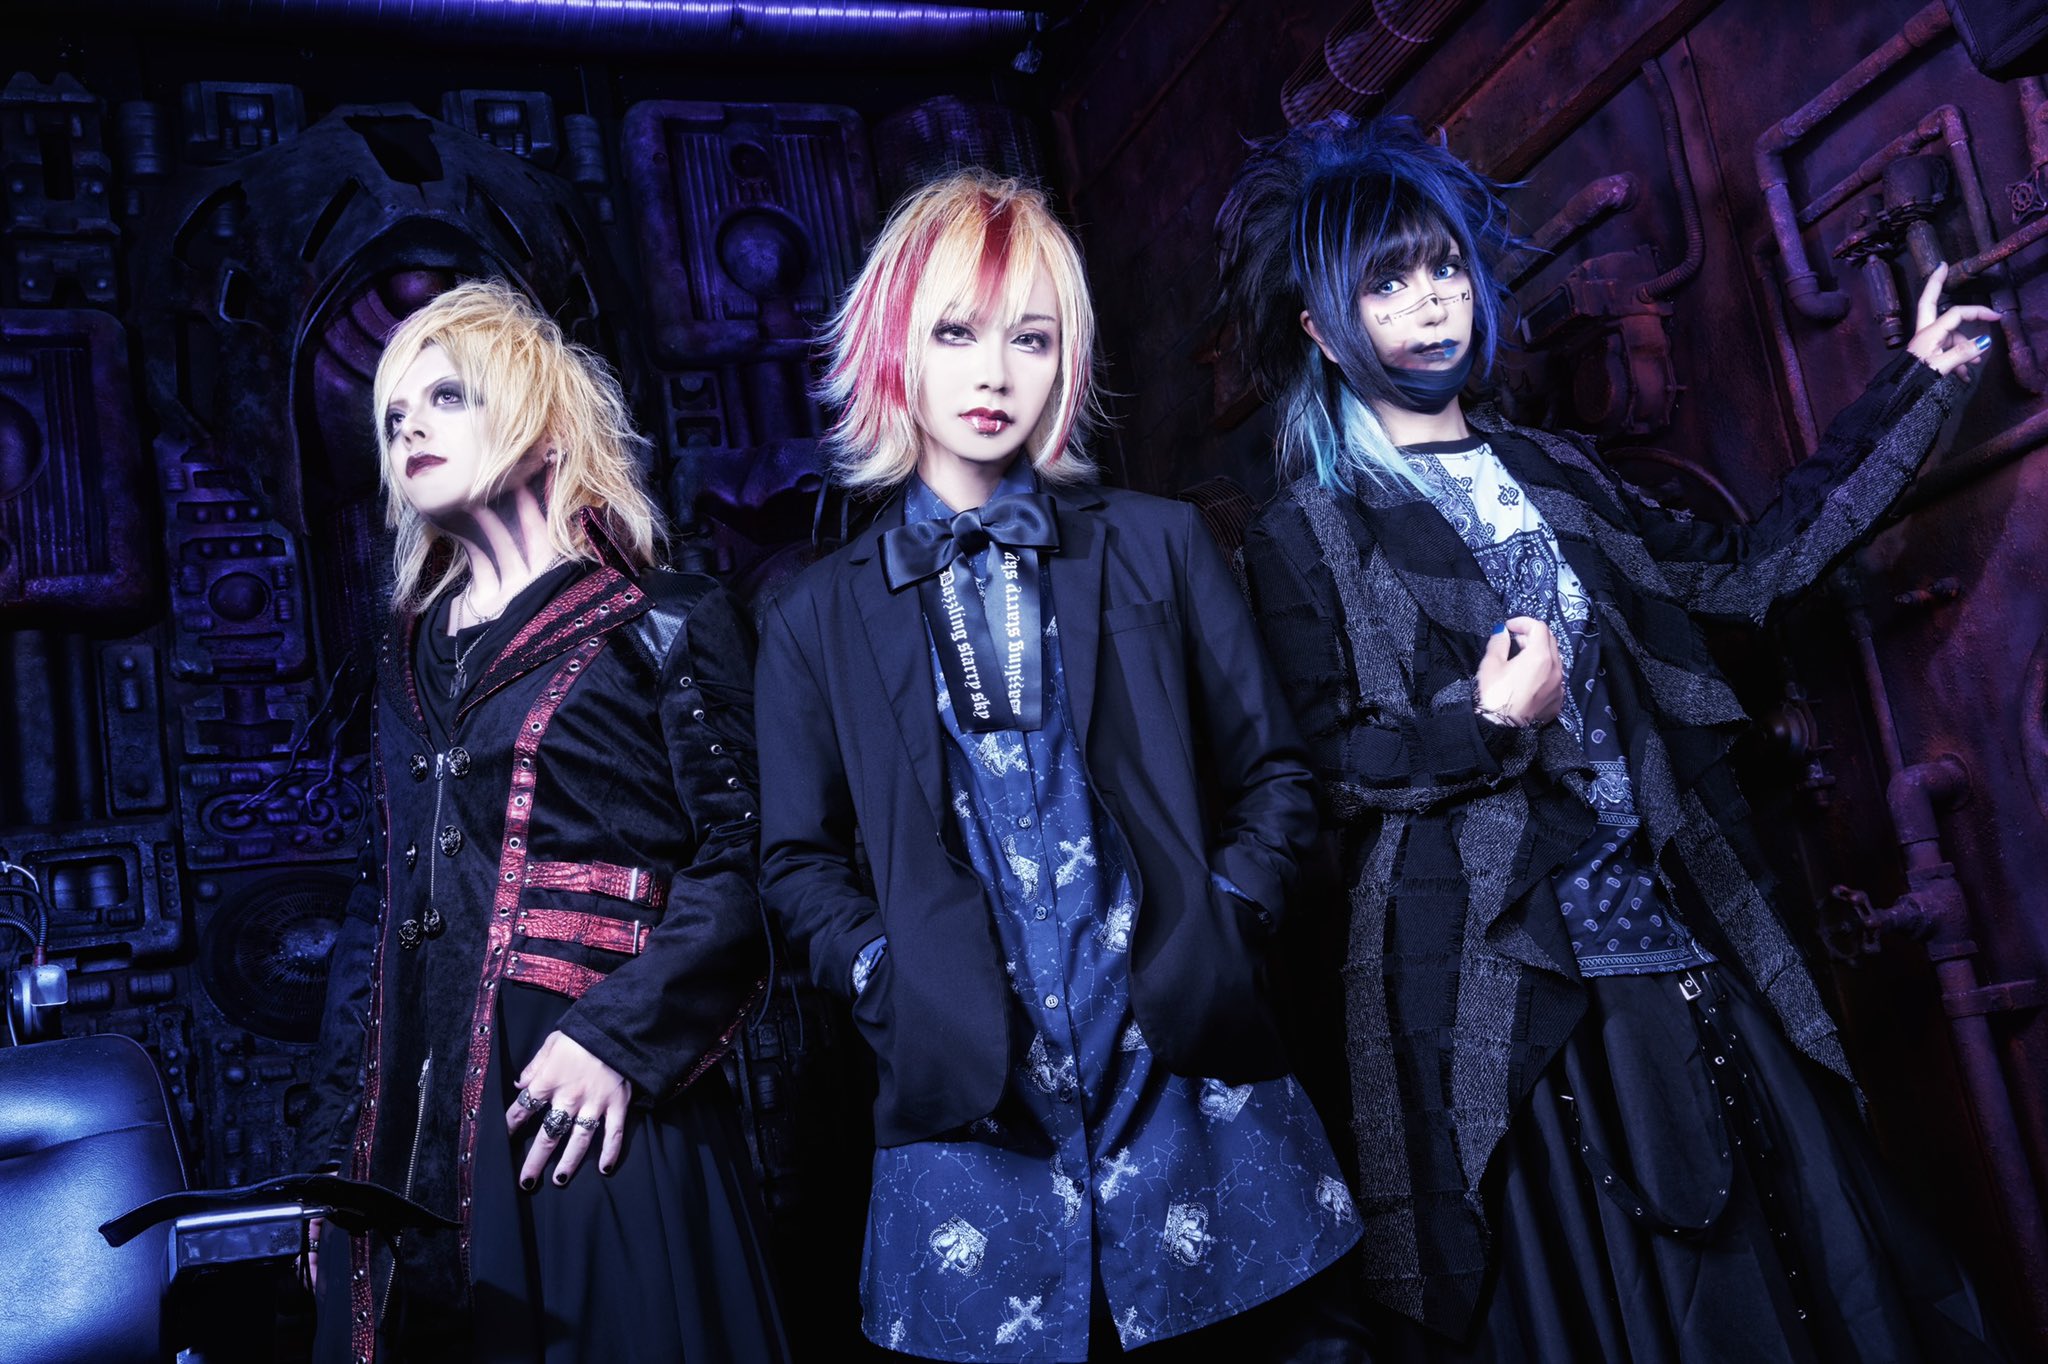 DOGMAS – “Fragrance” song preview and new look